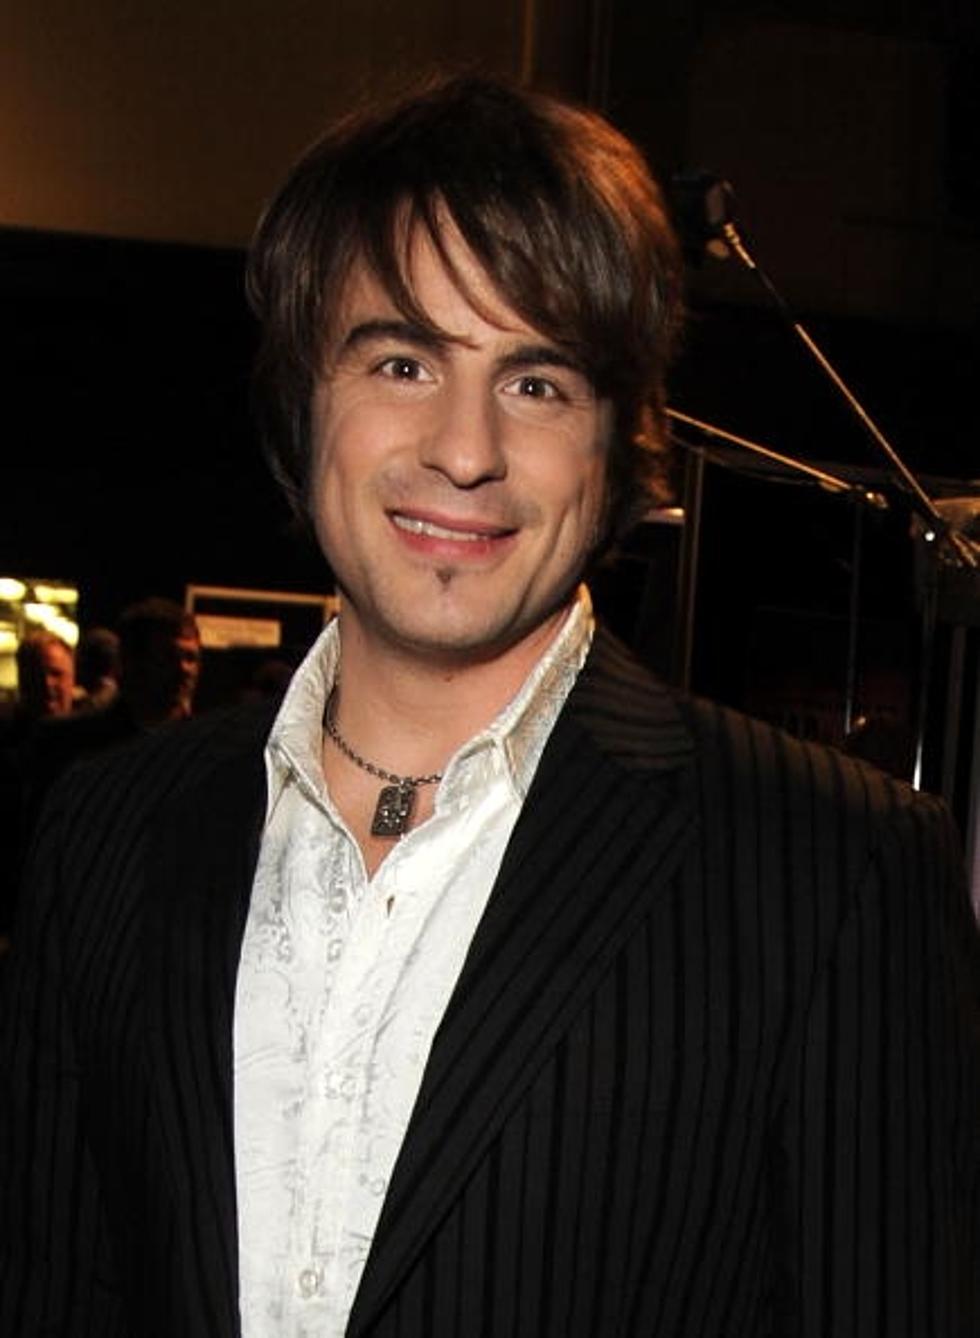 Jimmy Wayne’s Novel Parallels His Song “Paper Angels” [VIDEO]